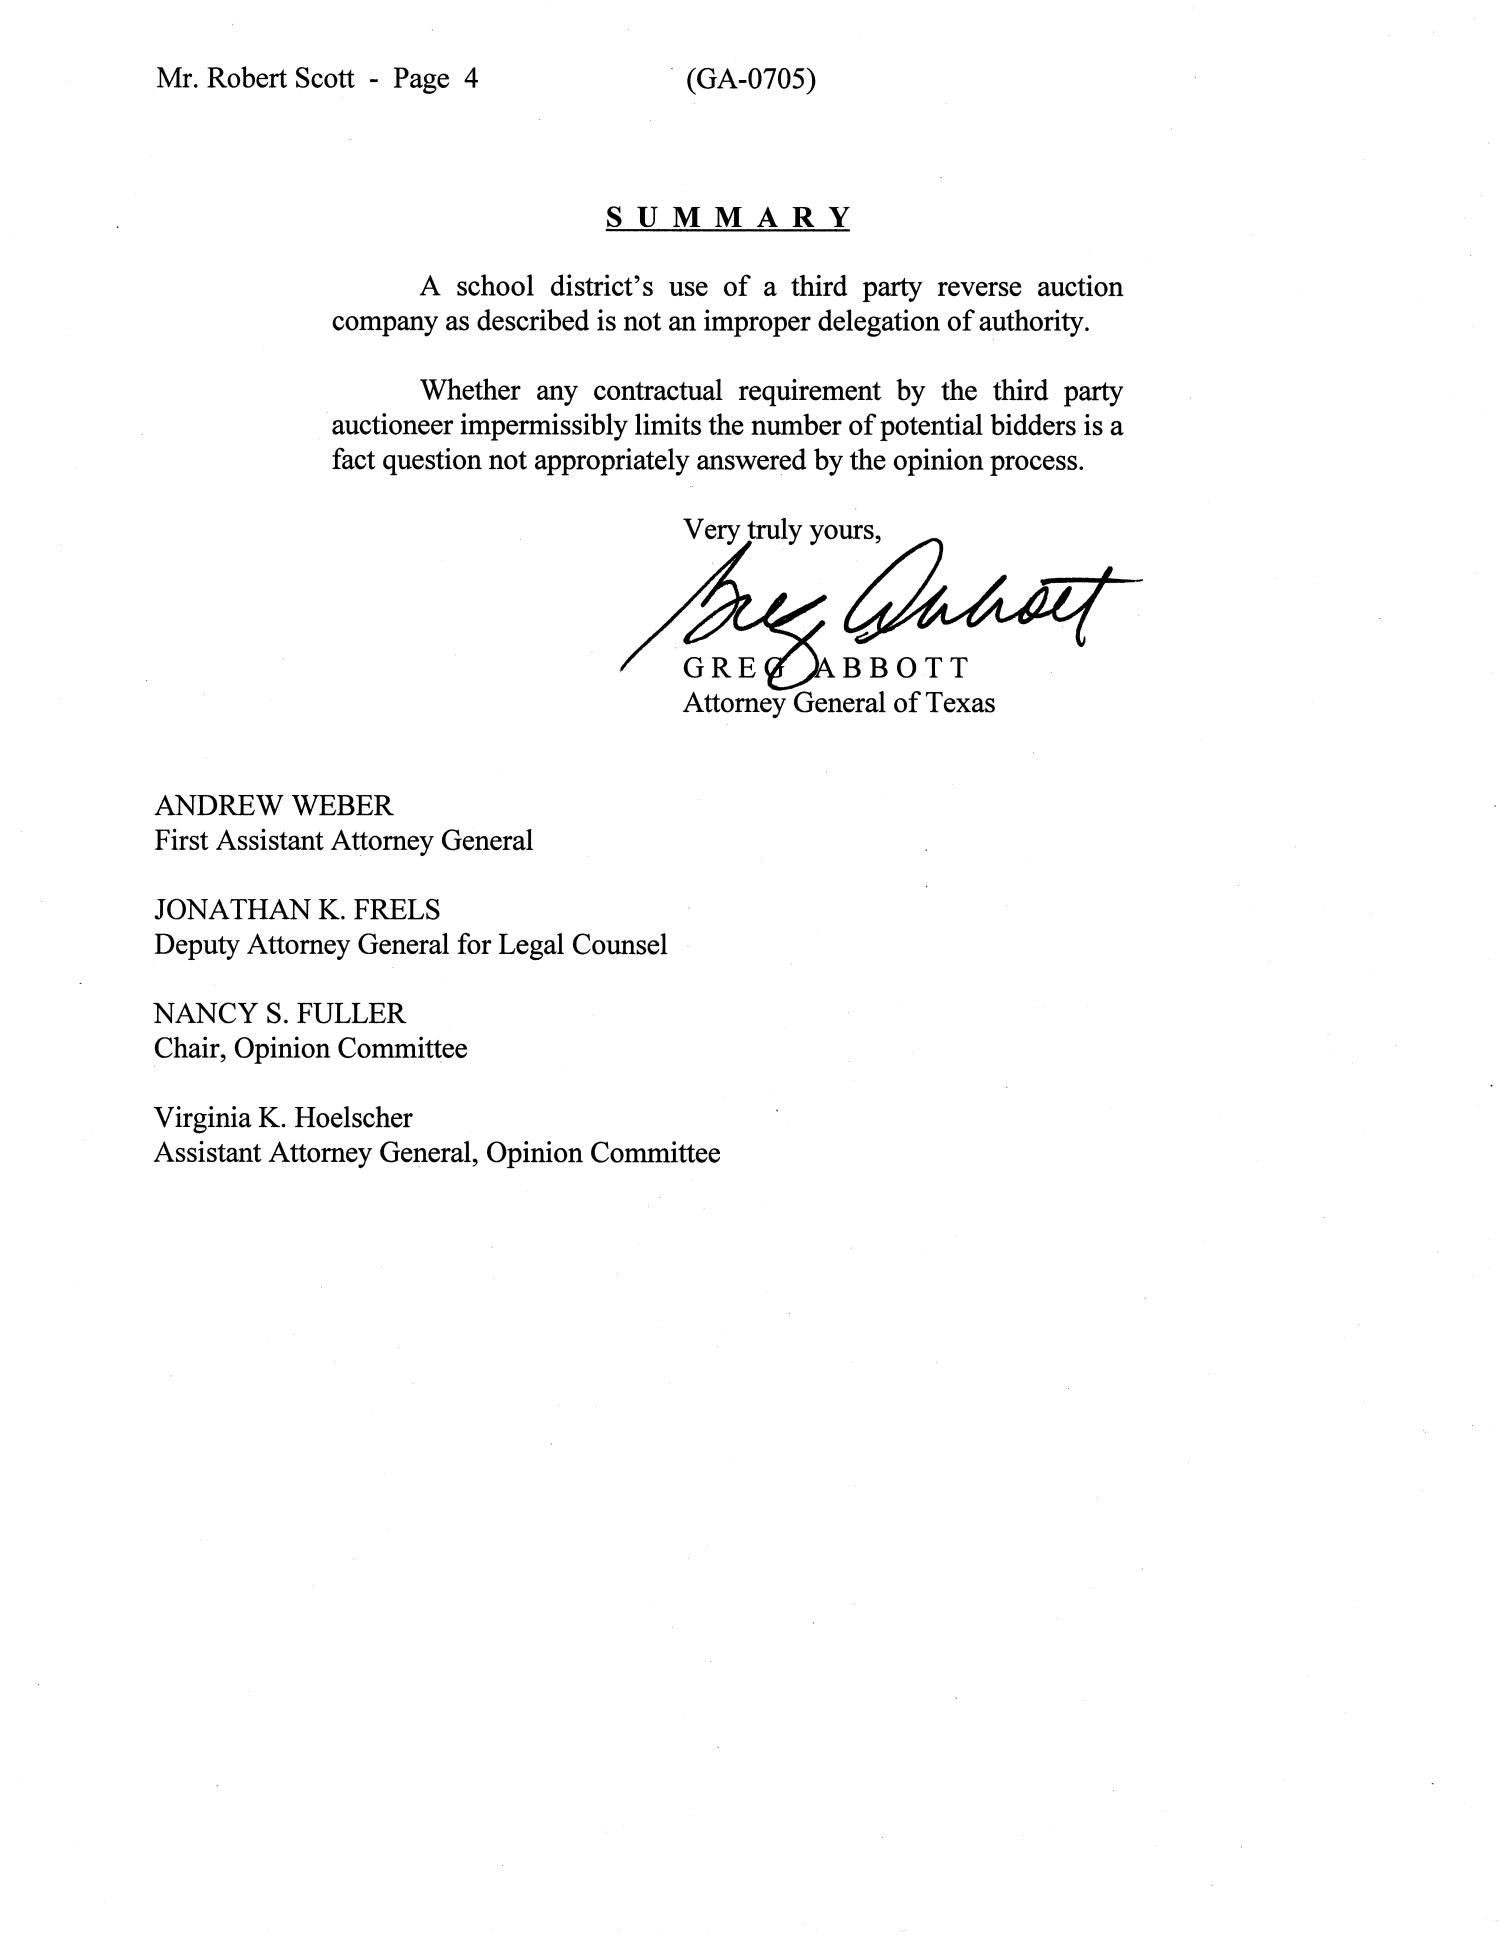 Texas Attorney General Opinion: GA-0705
                                                
                                                    [Sequence #]: 4 of 4
                                                